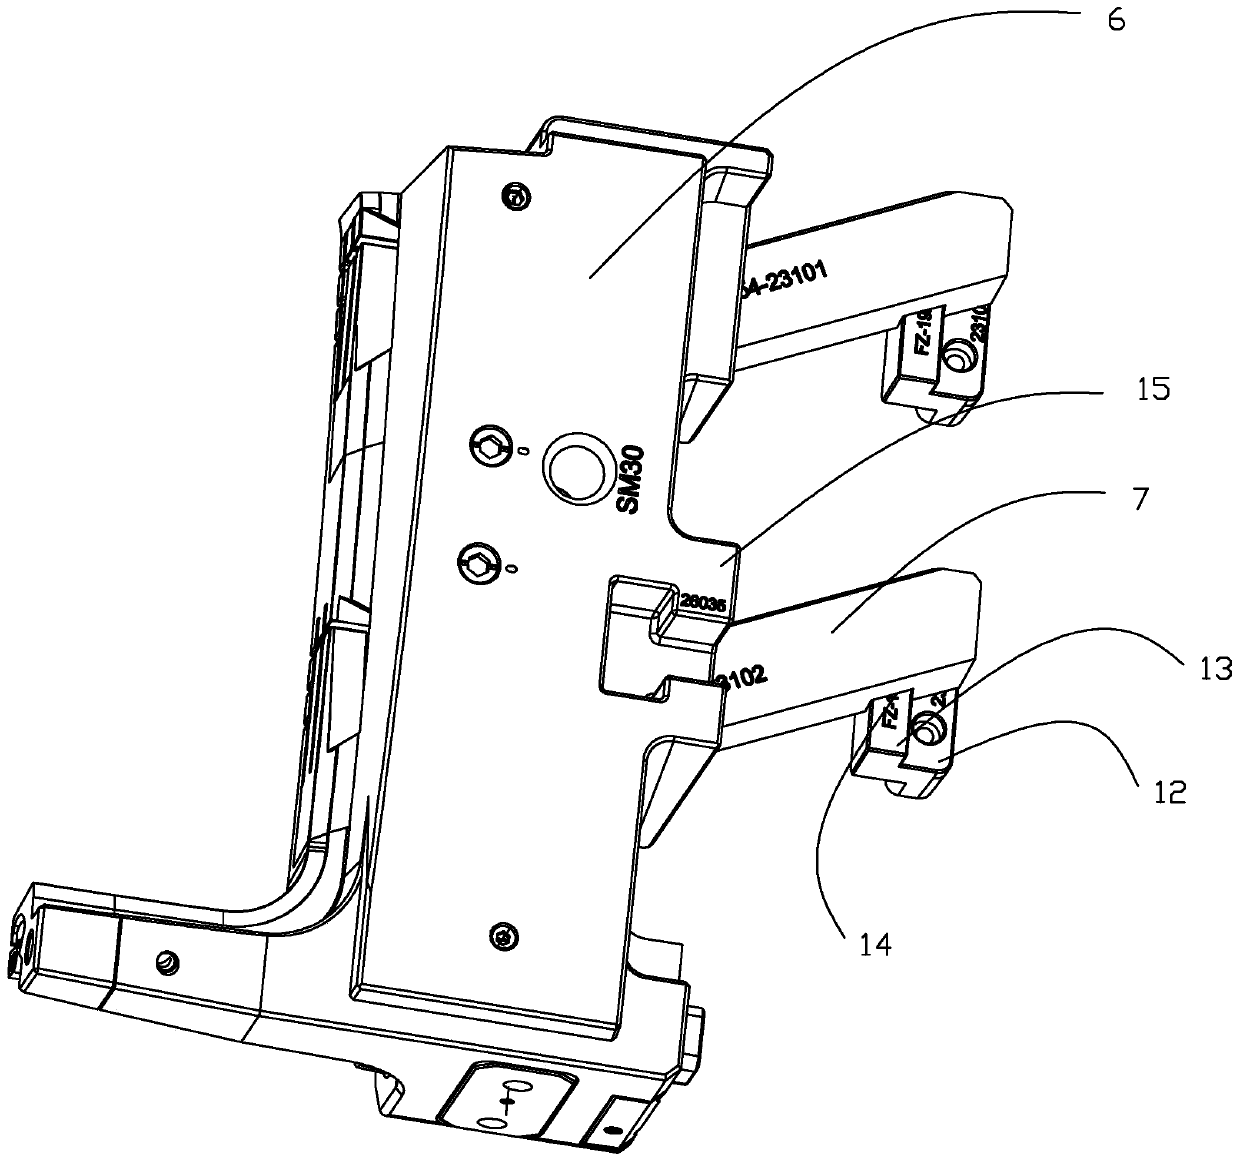 Vehicle filter outer shell core pulling mechanism